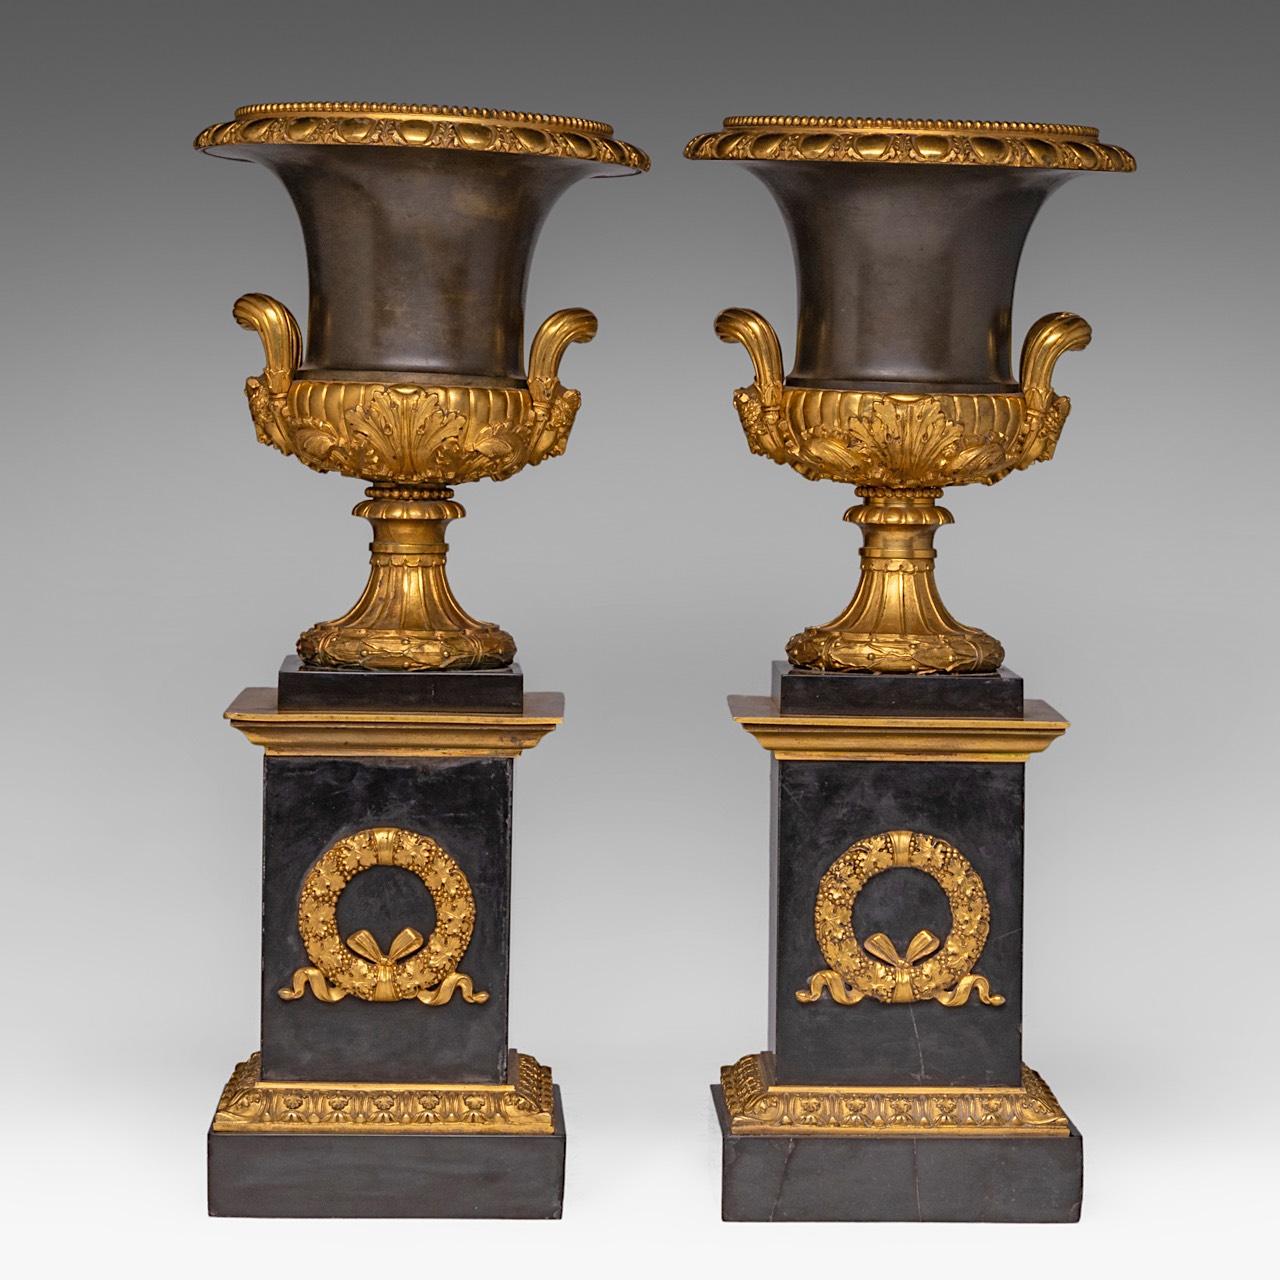 A fine pair of Neoclassical patinated and gilt bronze and black marble Medici type vases, H 45 cm - Image 3 of 5